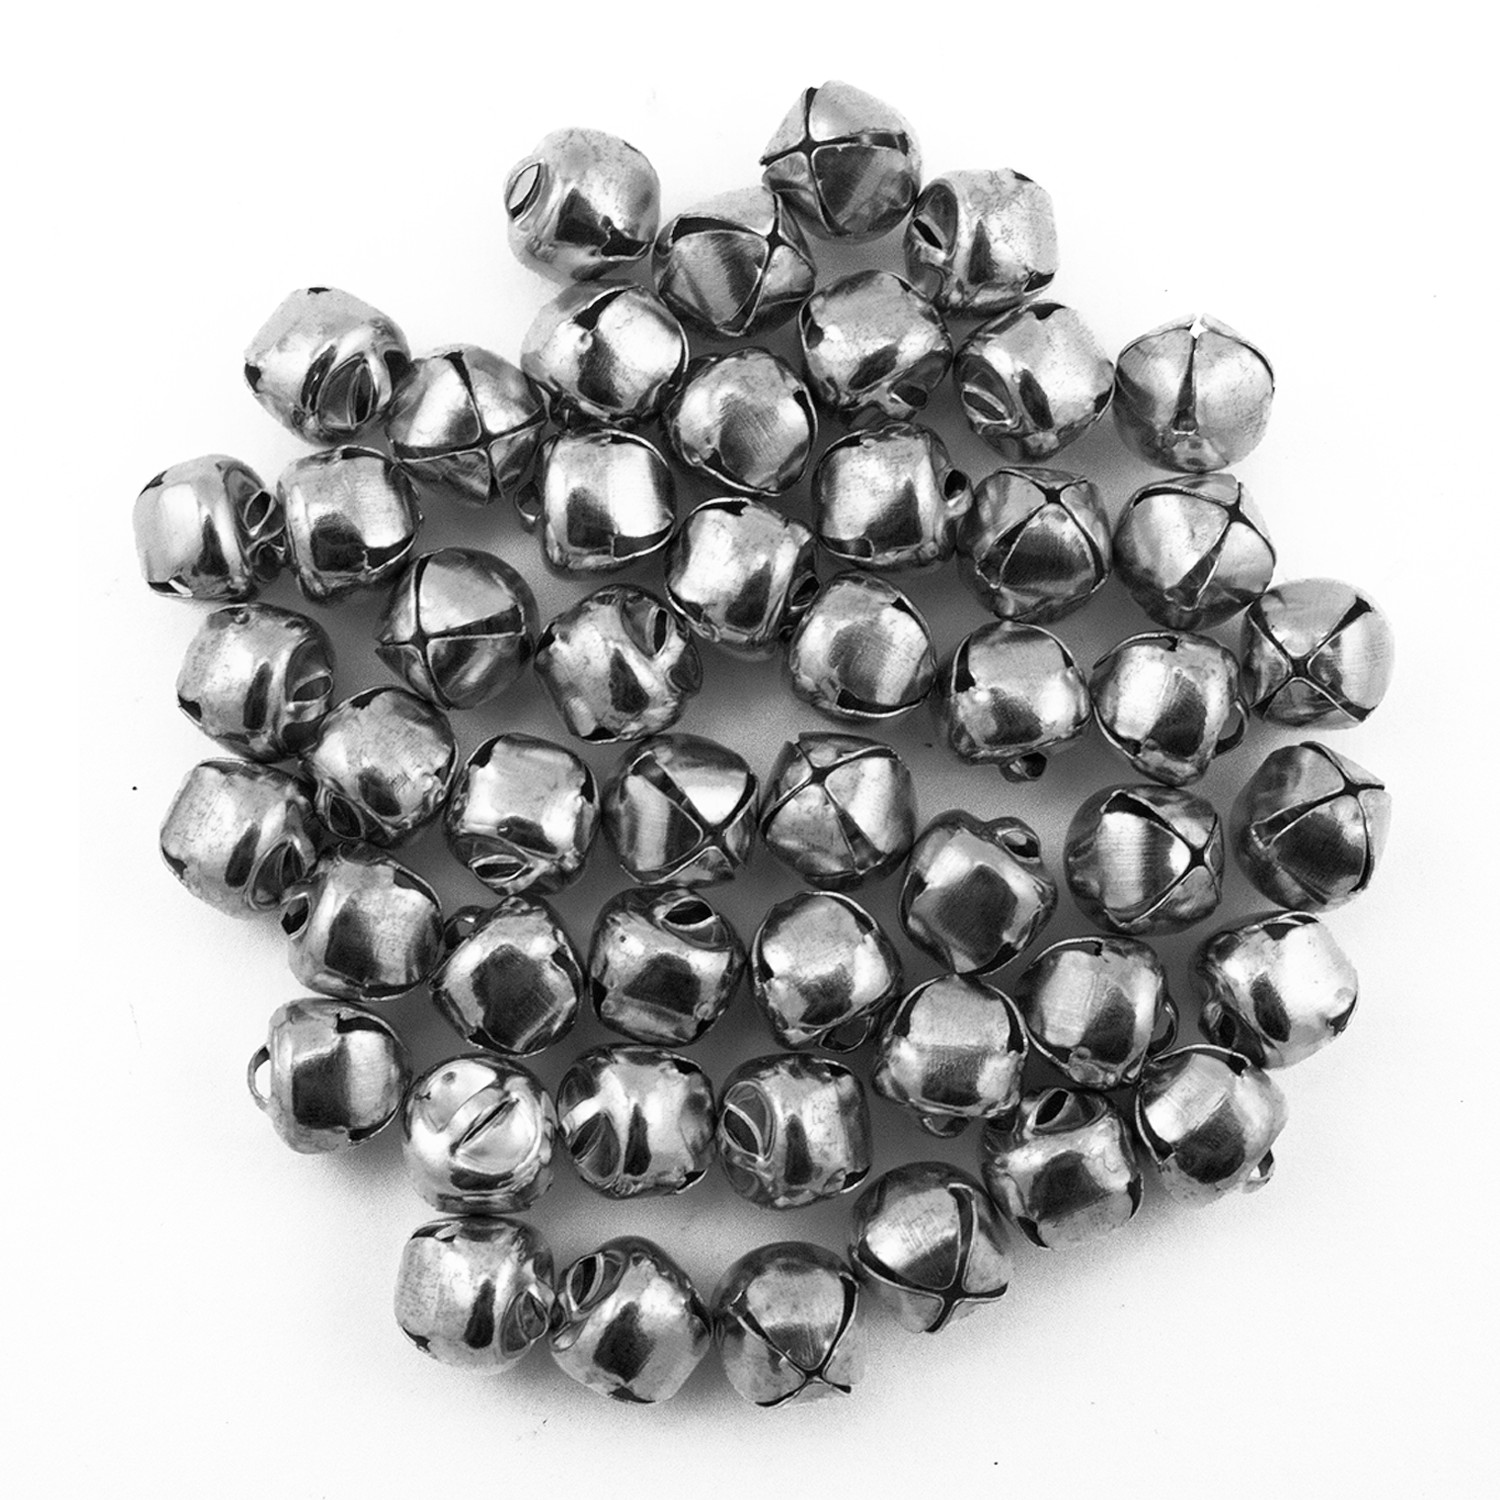 Small Jingle Bells for Crafts 1/2 Inch Silver Craft Bells Bulk Christmas  Bell